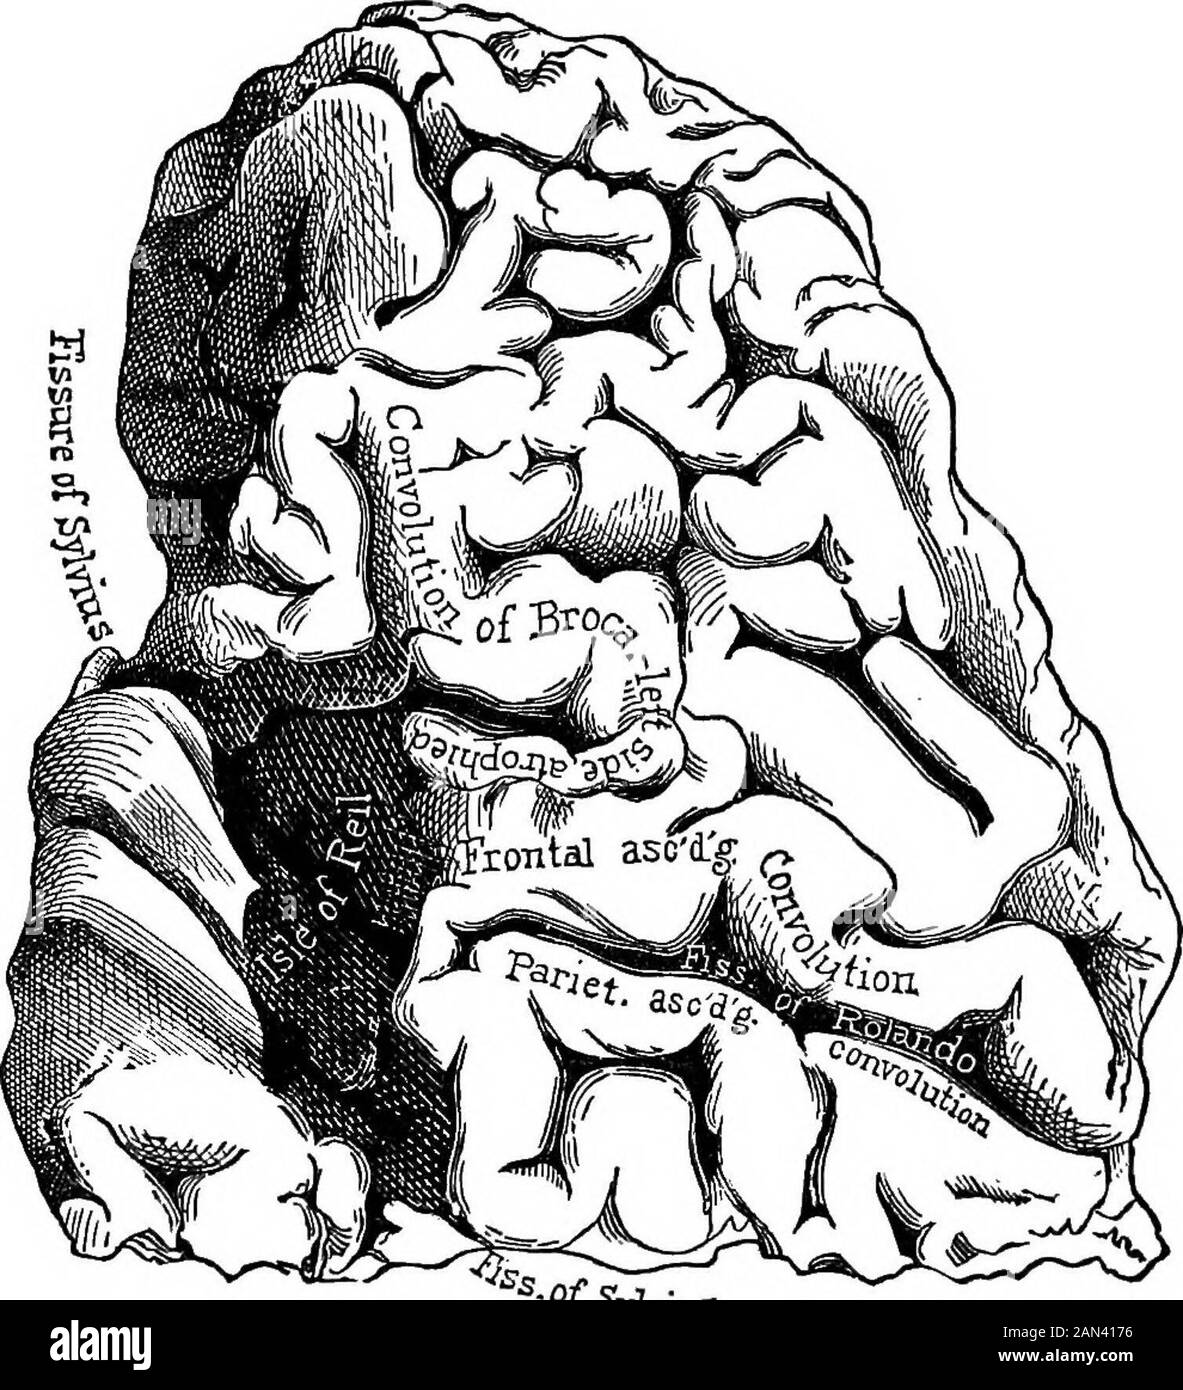 Lectures on localization in diseases of the brain, delivered at the Faculté de médecine, Paris, 1875 . Fig. 12.—Vascular territories of the superior cerebral surface. (Daret.) Thedotted lines indicate the territories of the anterior, middle and posterior arteries. territory of the third convolution (in its posterior part). Ihere add a conclusively corroborative fact. The case wasa woman named Farn.... observed at Salpetriere. She wasattacked with aphasia. There had existed no trace of paral-ysis either of motion or sensation. Aphasia was in this case 54 DISEASES OF THE BRAIN. the only sympto Stock Photo